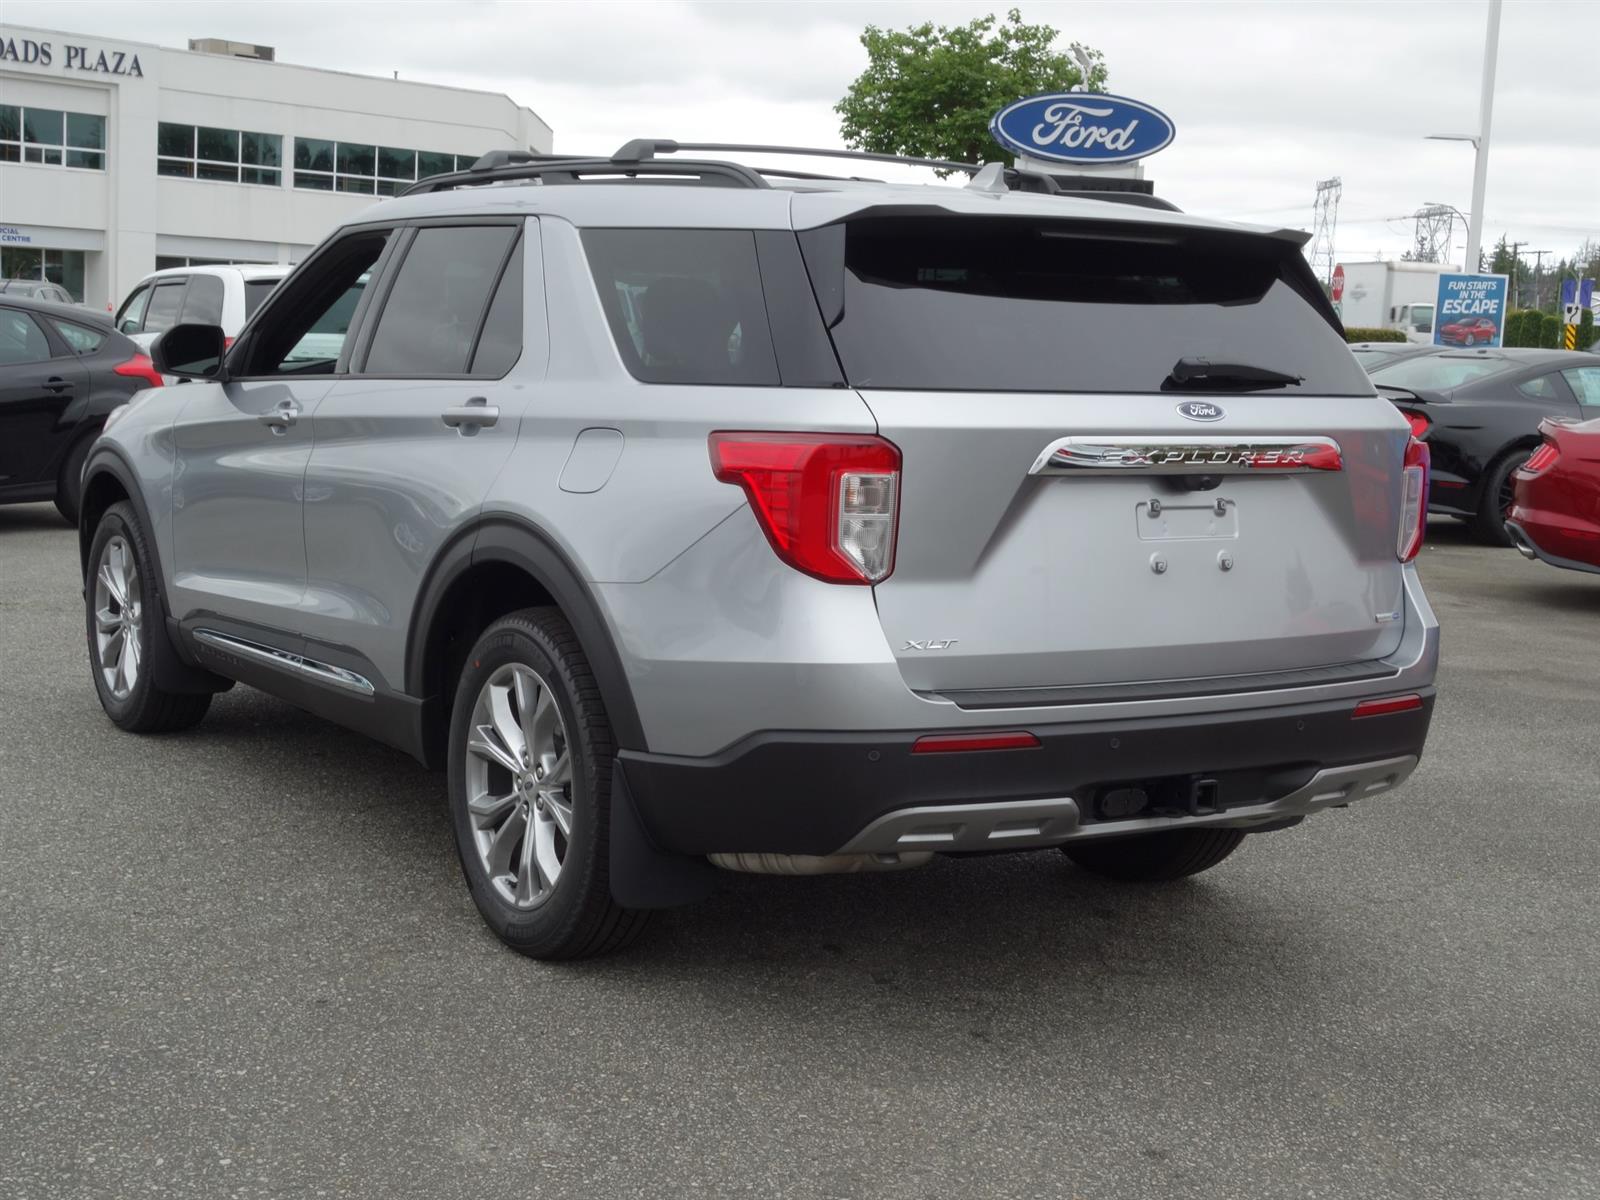 2020 Ford Explorer XLT Iconic Silver, 2.3L I-4 EcoBoost Engine with